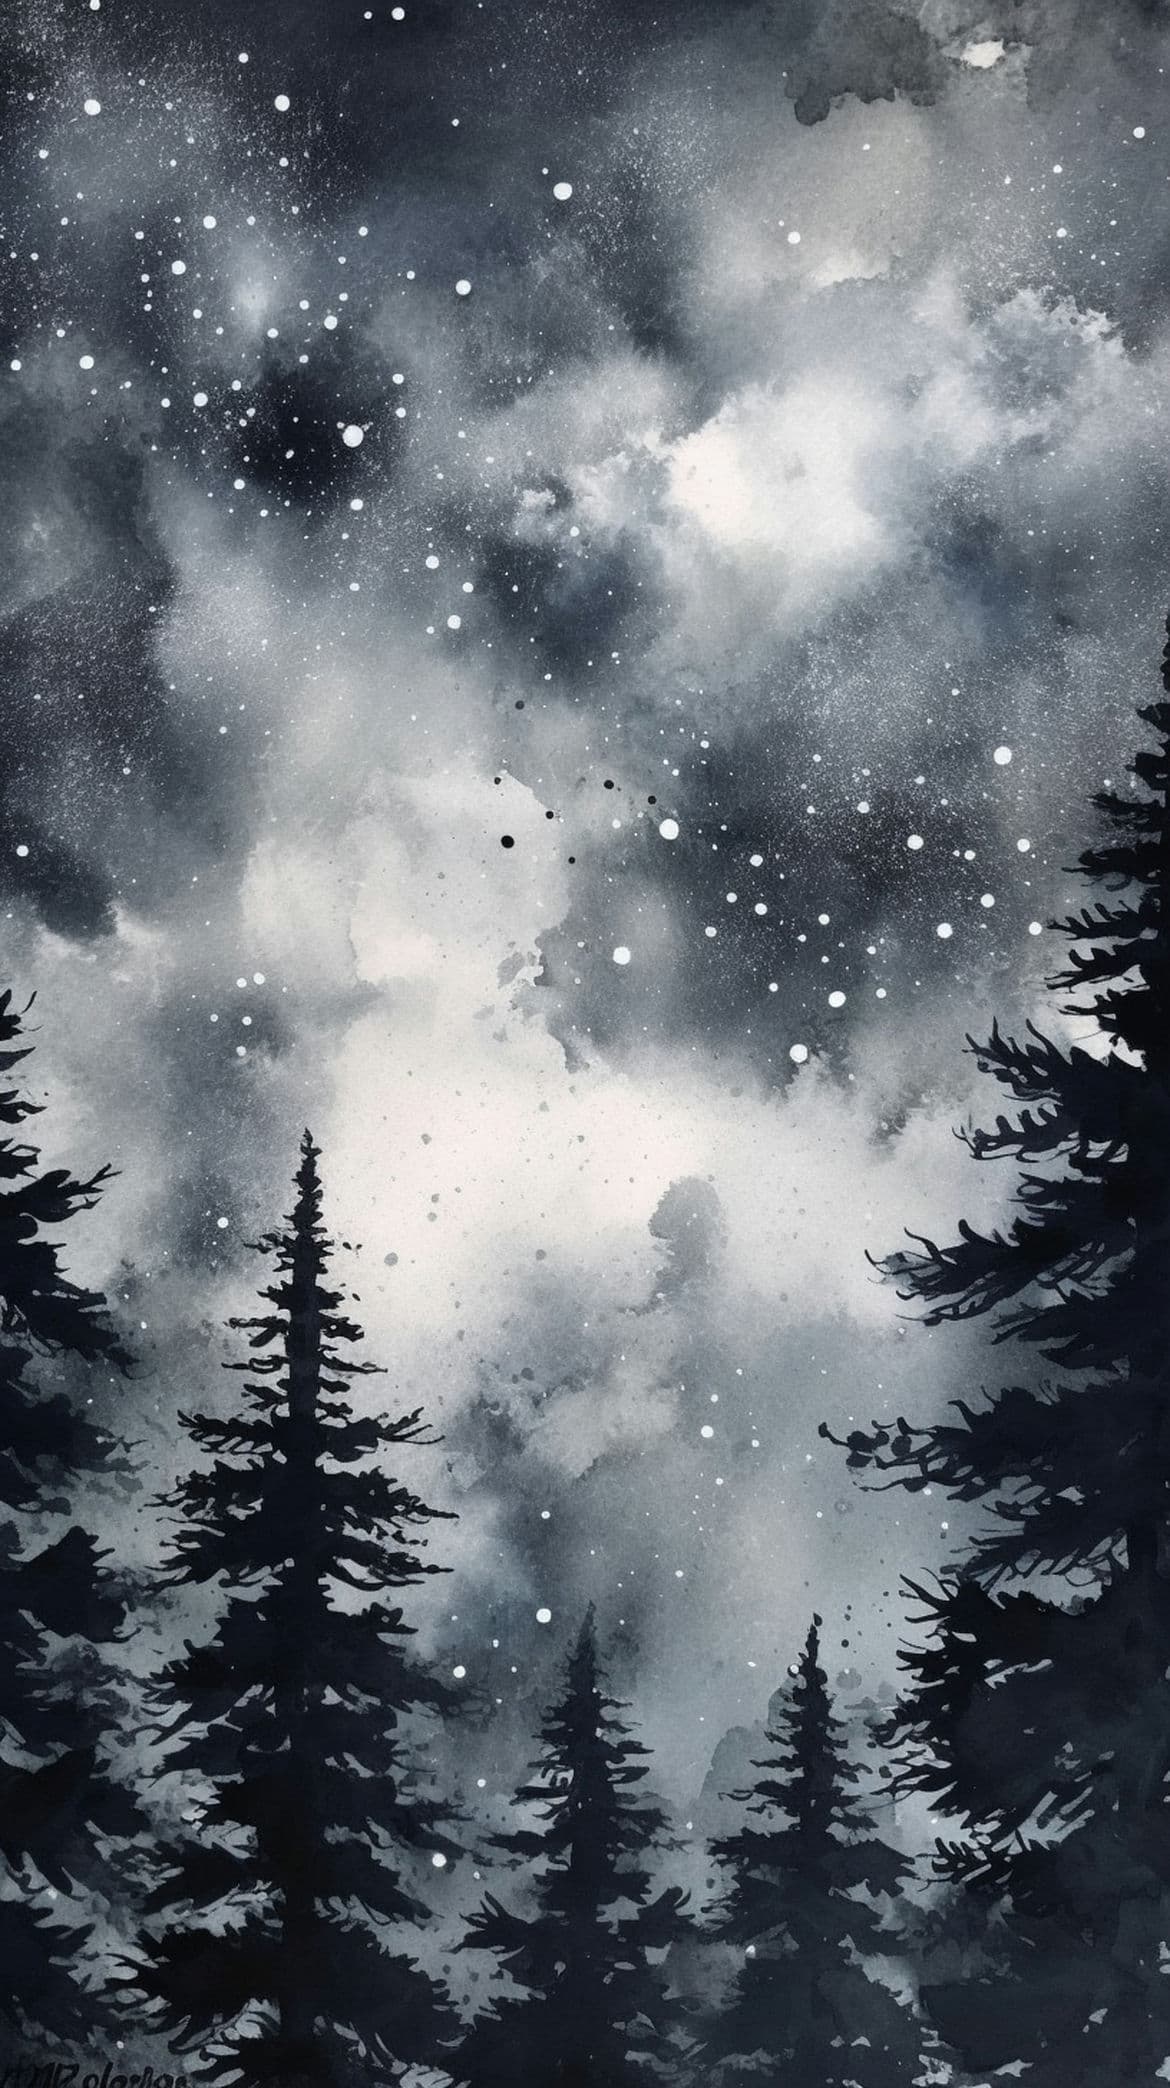 A black and white watercolor painting of a starry night sky with pine trees. - Black, black phone, gray